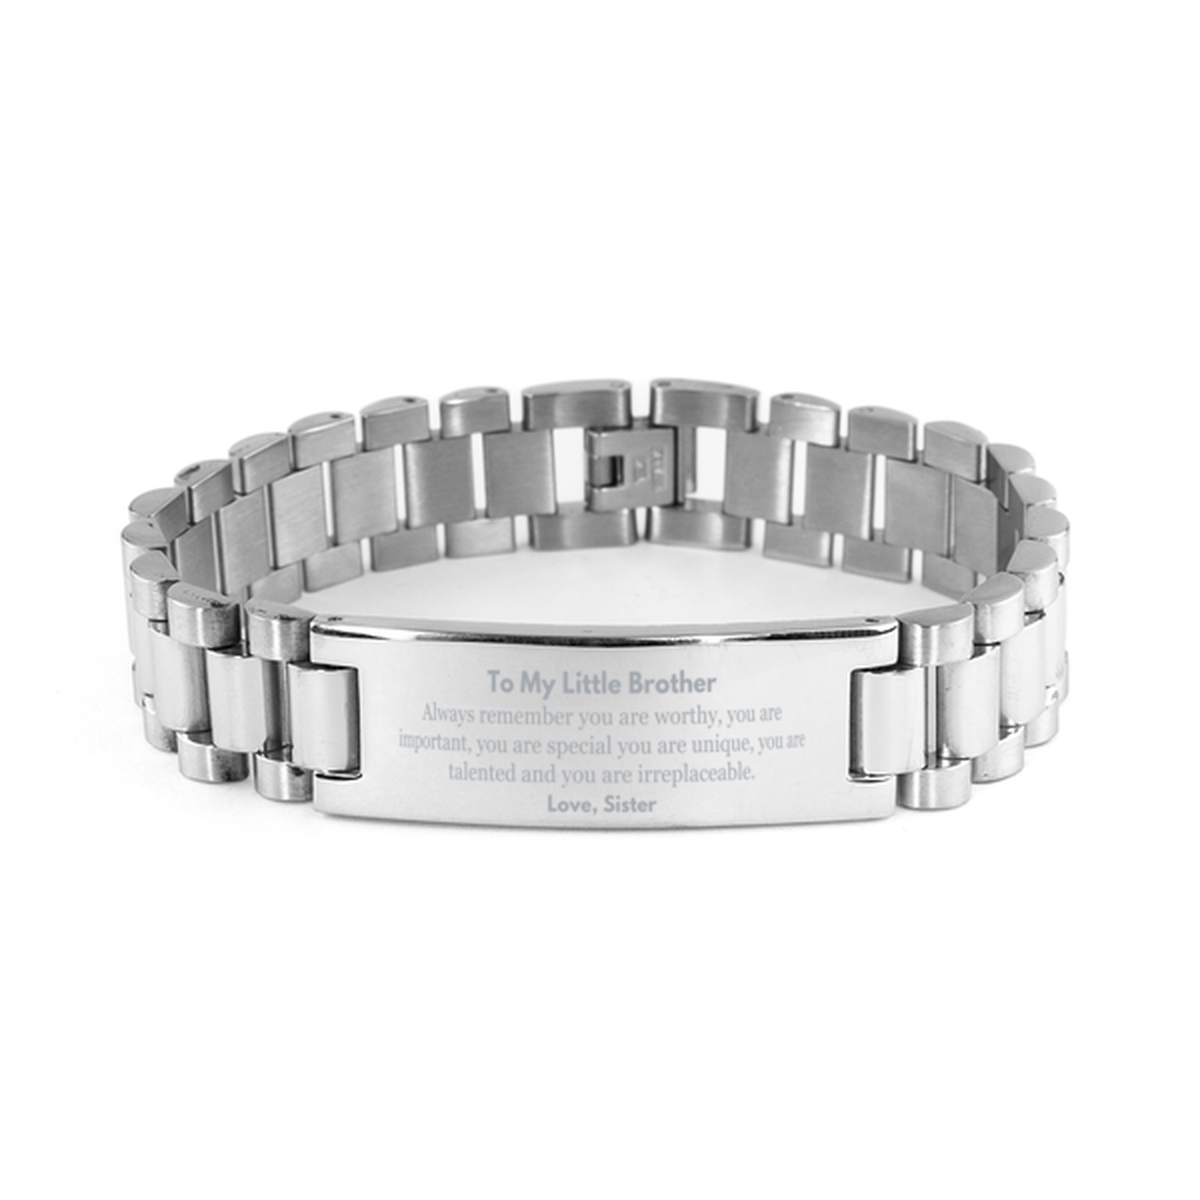 Little Brother Birthday Gifts from Sister, Inspirational Ladder Stainless Steel Bracelet for Little Brother Christmas Graduation Gifts for Little Brother Always remember you are worthy, you are important. Love, Sister